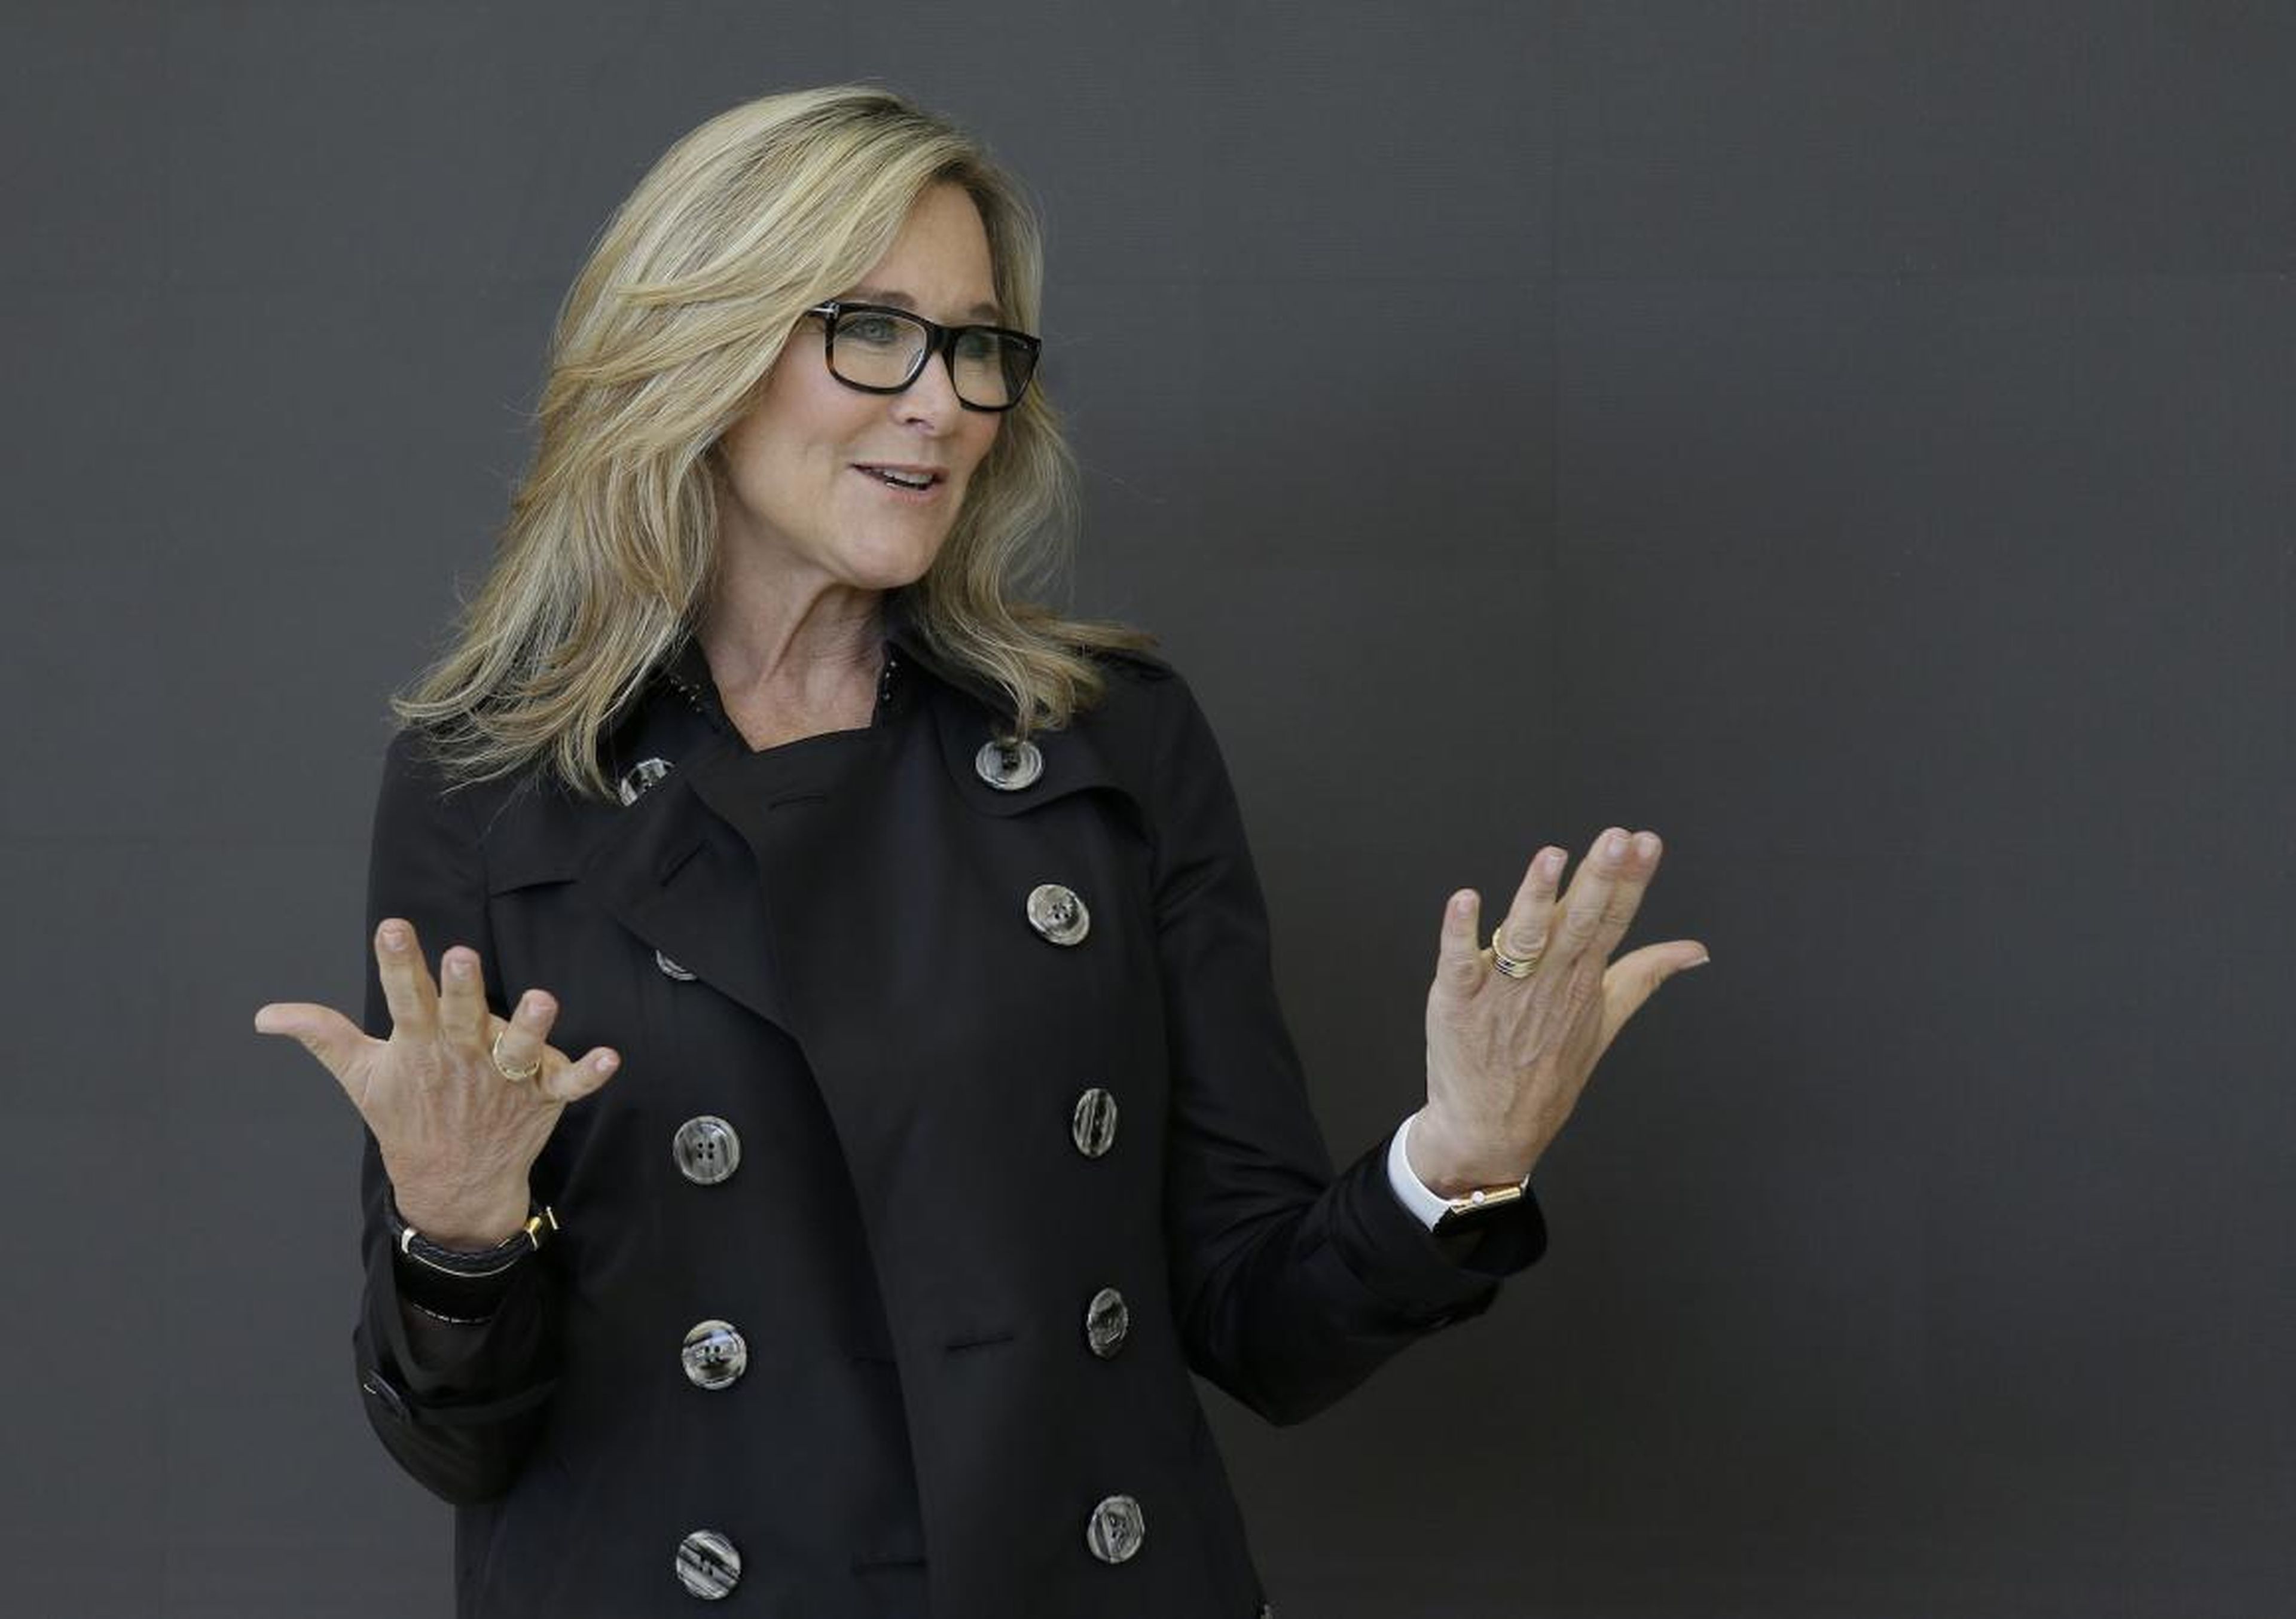 Angela Ahrendts was one of Apple’s highest-paid executives during her 5 years at the company — here are the 3 biggest lessons she learned on the job